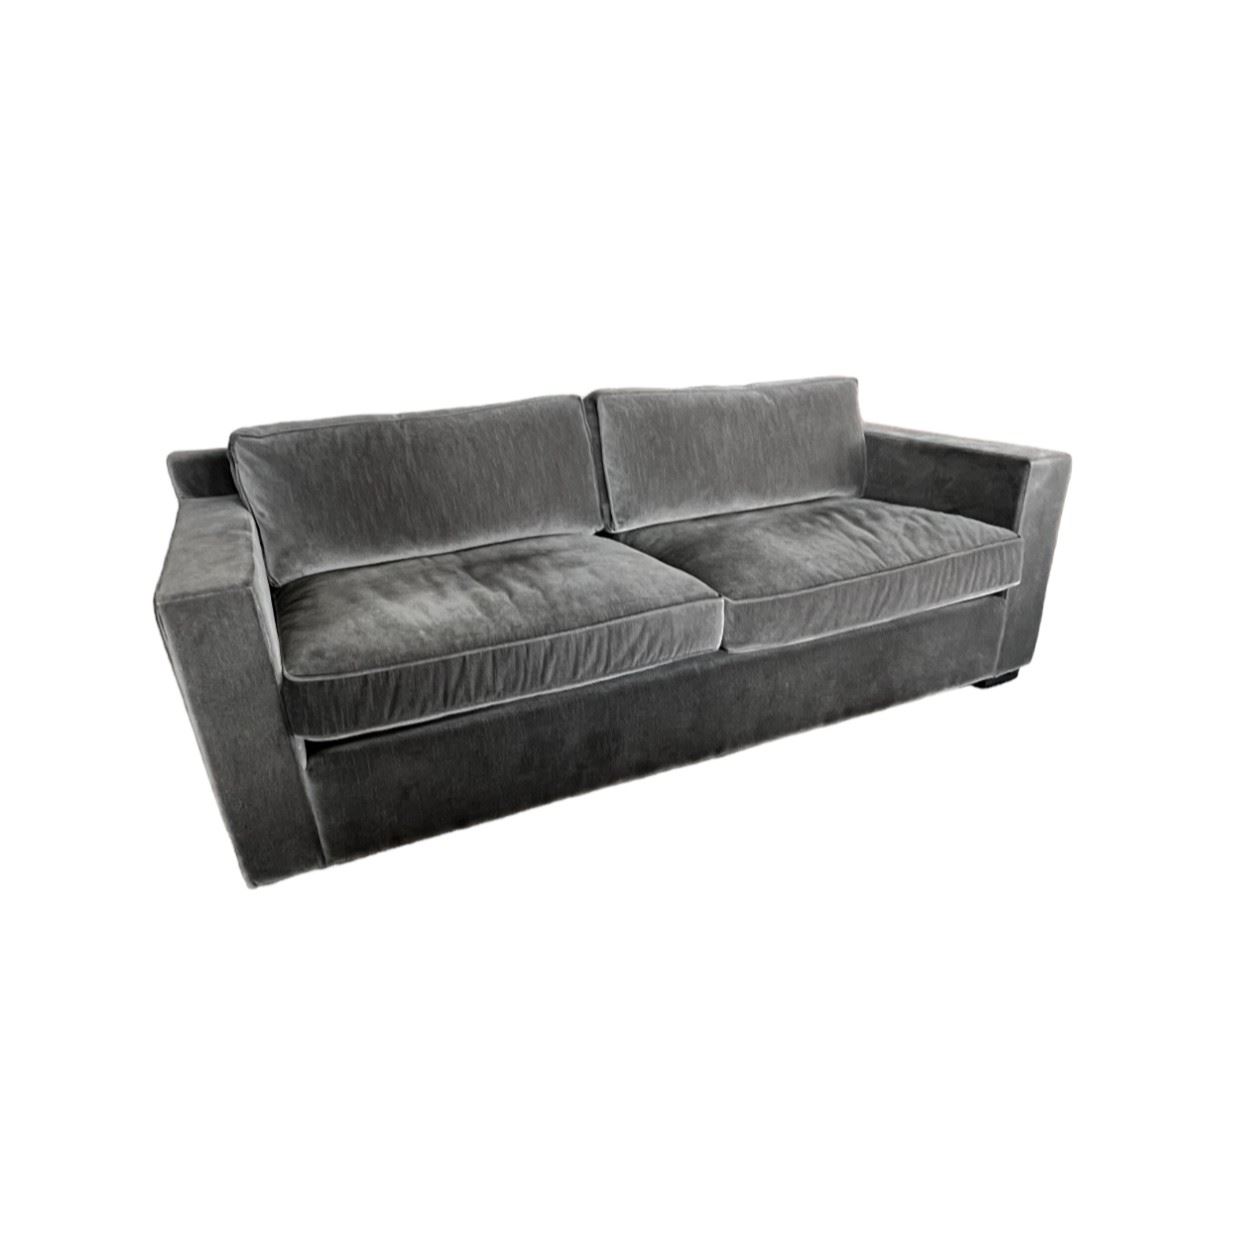 $6500 USD       2 Restoration Hardware RH 7 Ft. Maddox Grey Velvet Sofas GM185-4     Description: Designed by the esteemed architects Leo Marmol and Ron Radziner, this sofa embodies the elegant restraint and luxe comfort of 1930s French furnishings. The perfectly proportioned silhouette features neatly piped seat and back cushions flanked by clean track arms.  Believed to be upholstered in Vintage Velvet Graphite

Dimensions: 84 x 40.5 x 29.5  in

Frame Height: 25½"
Seat Height: 16"
Arm: 8"W x 25½"H
Condition: Excellent, like new condition. 

Location: Local pick up Vancouver WA 98661.  Shipper suggestions available upon request. Item is located on the 3rd floor of a condominium complex with very easy access to an elevator.       https://goodbyhello.com/products/copy-of-rh-spencer-round-chandelier-28-gm185-3?_pos=10&_sid=b107abd28&_ss=r